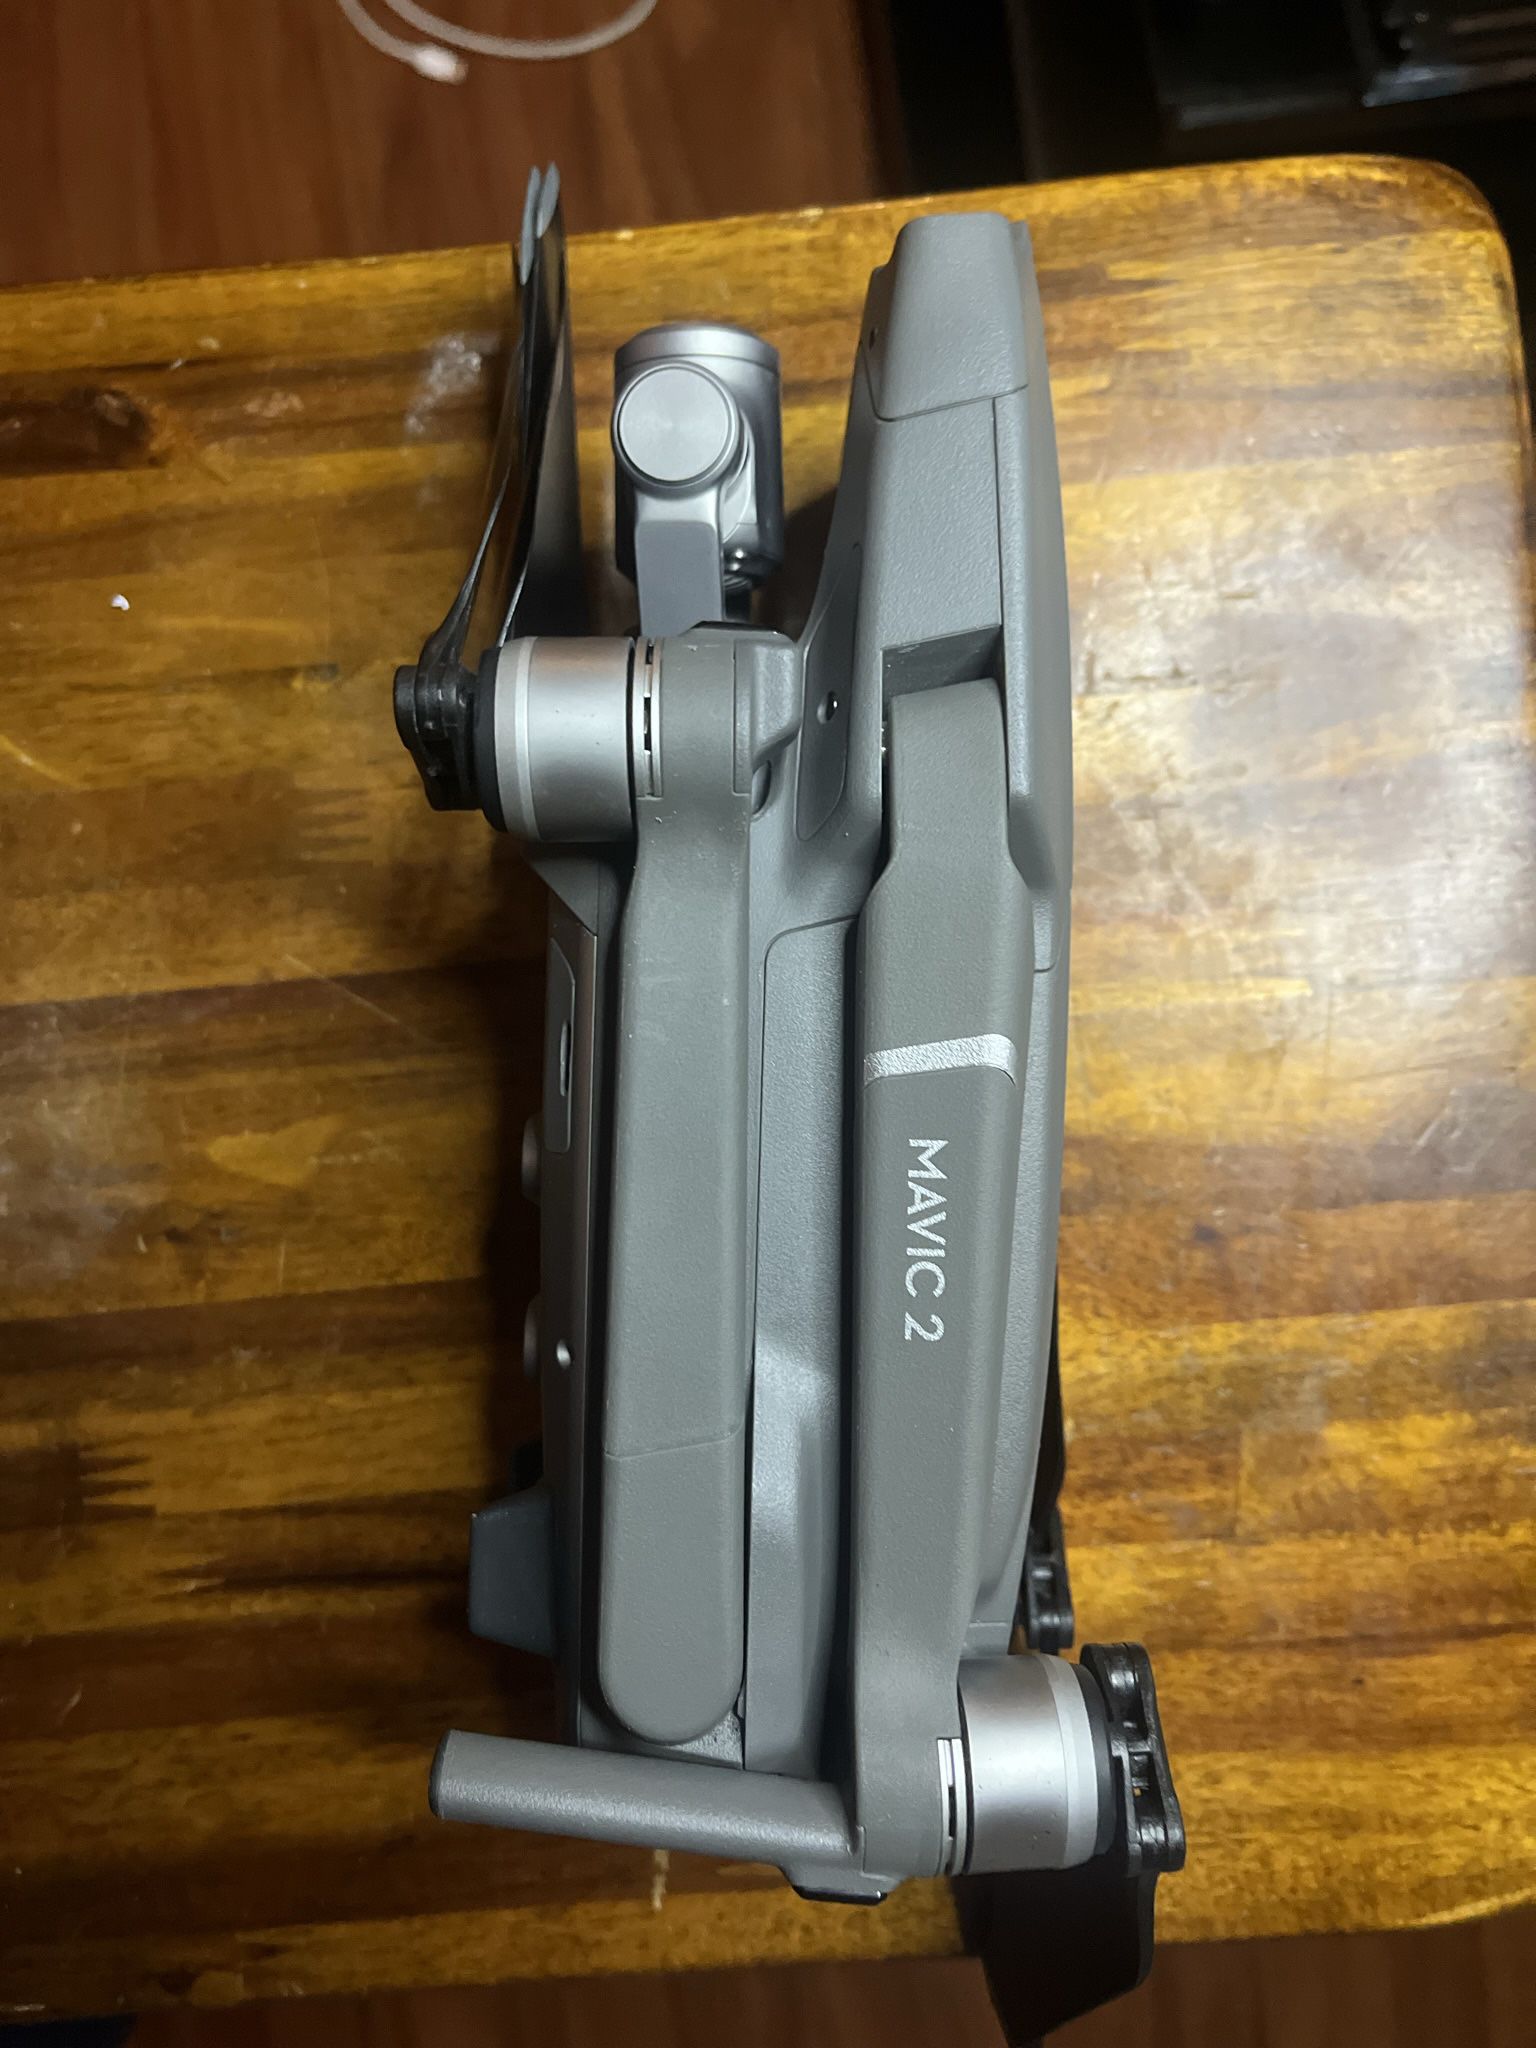 DJI Mavic 2 Zoom Drone Like New, Slightly Used Excellent Condition 31 Minutes Of Flying Within Charge 